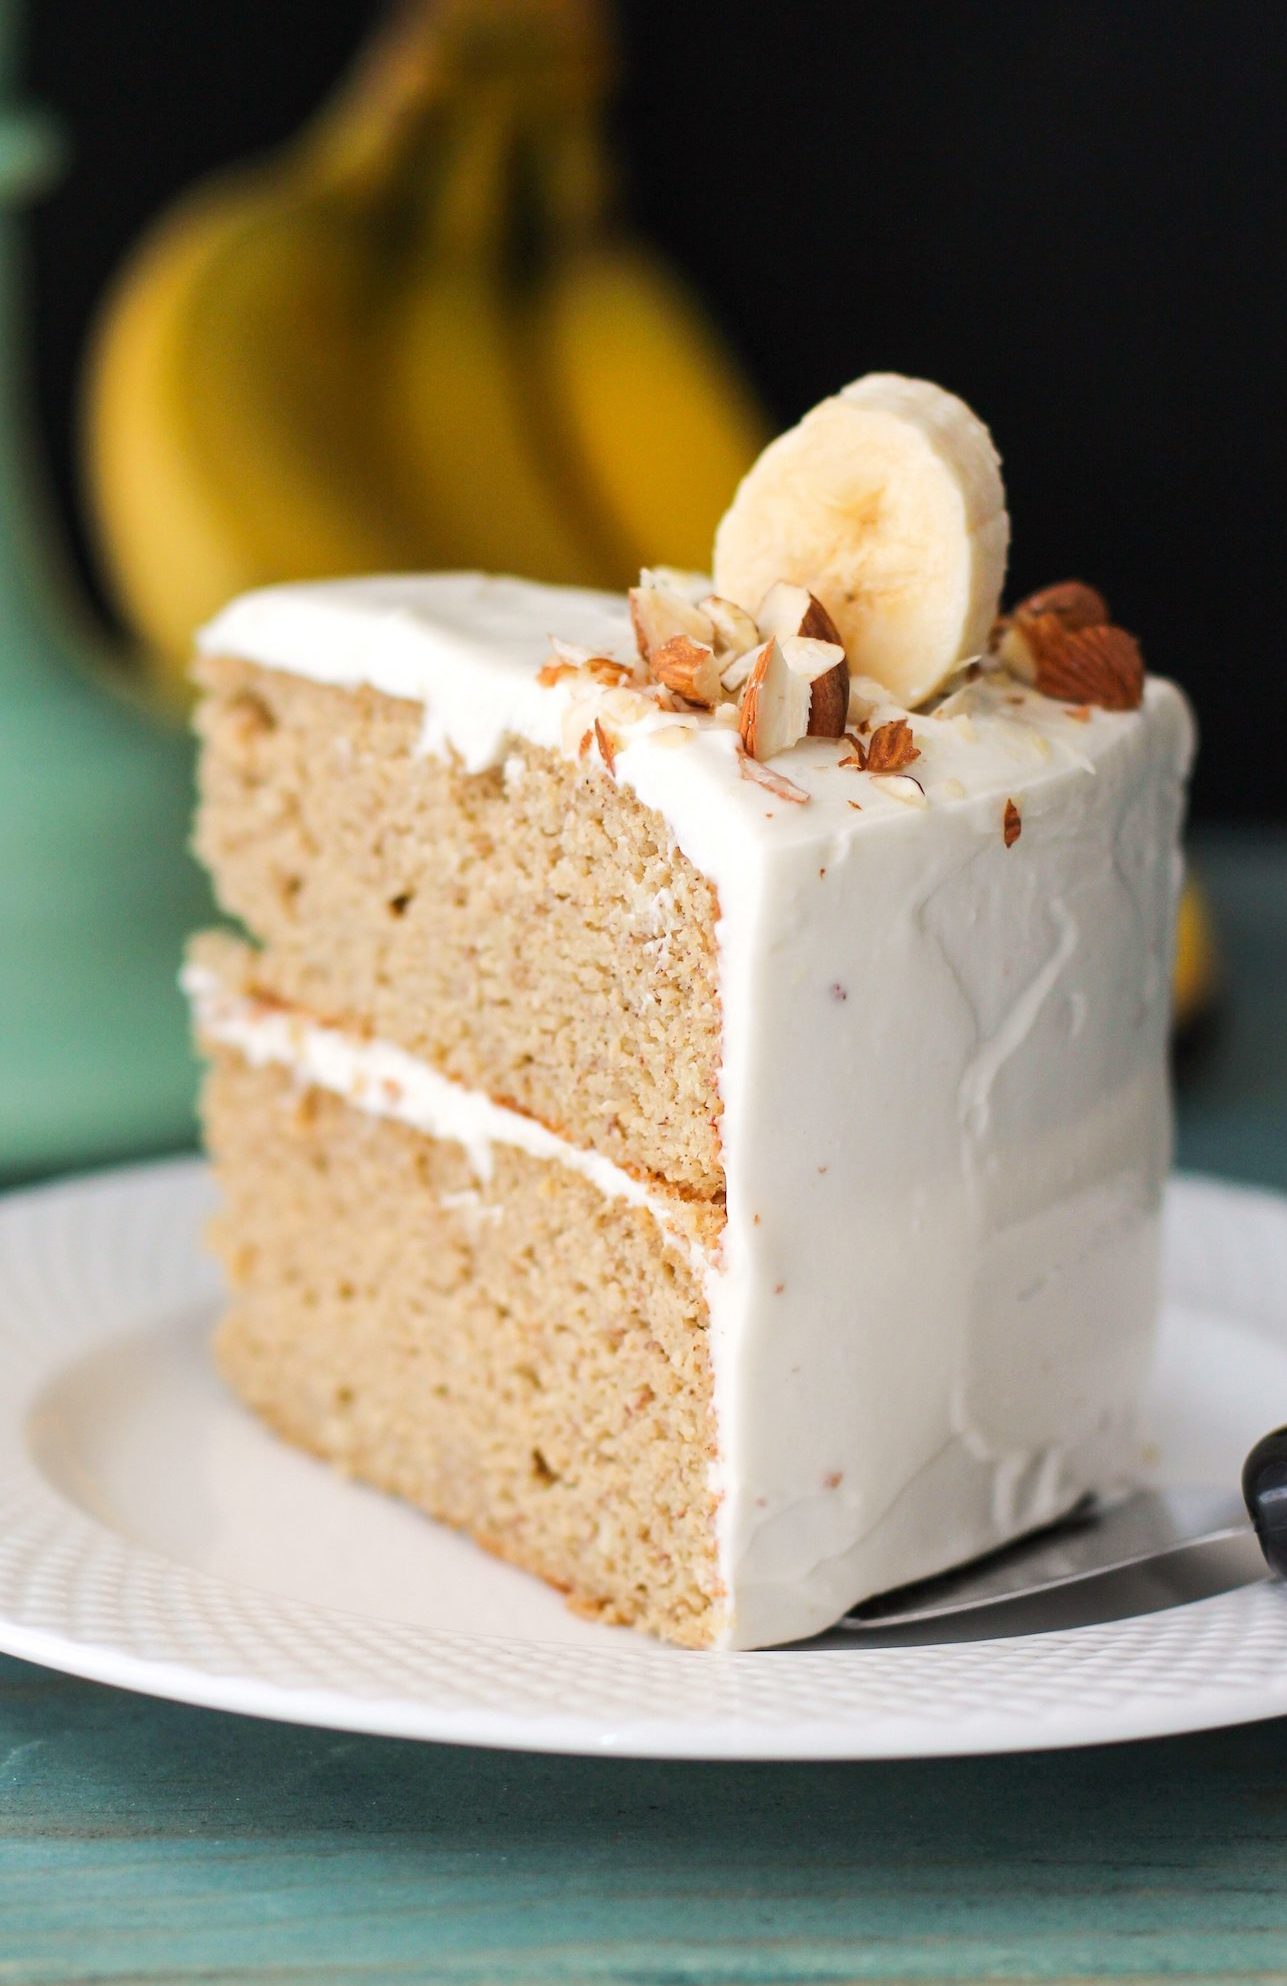 Healthy Banana Cake with Cream Cheese Frosting (refined sugar free, high protein, high fiber, gluten free) - Healthy Dessert Recipes at Desserts with Benefits